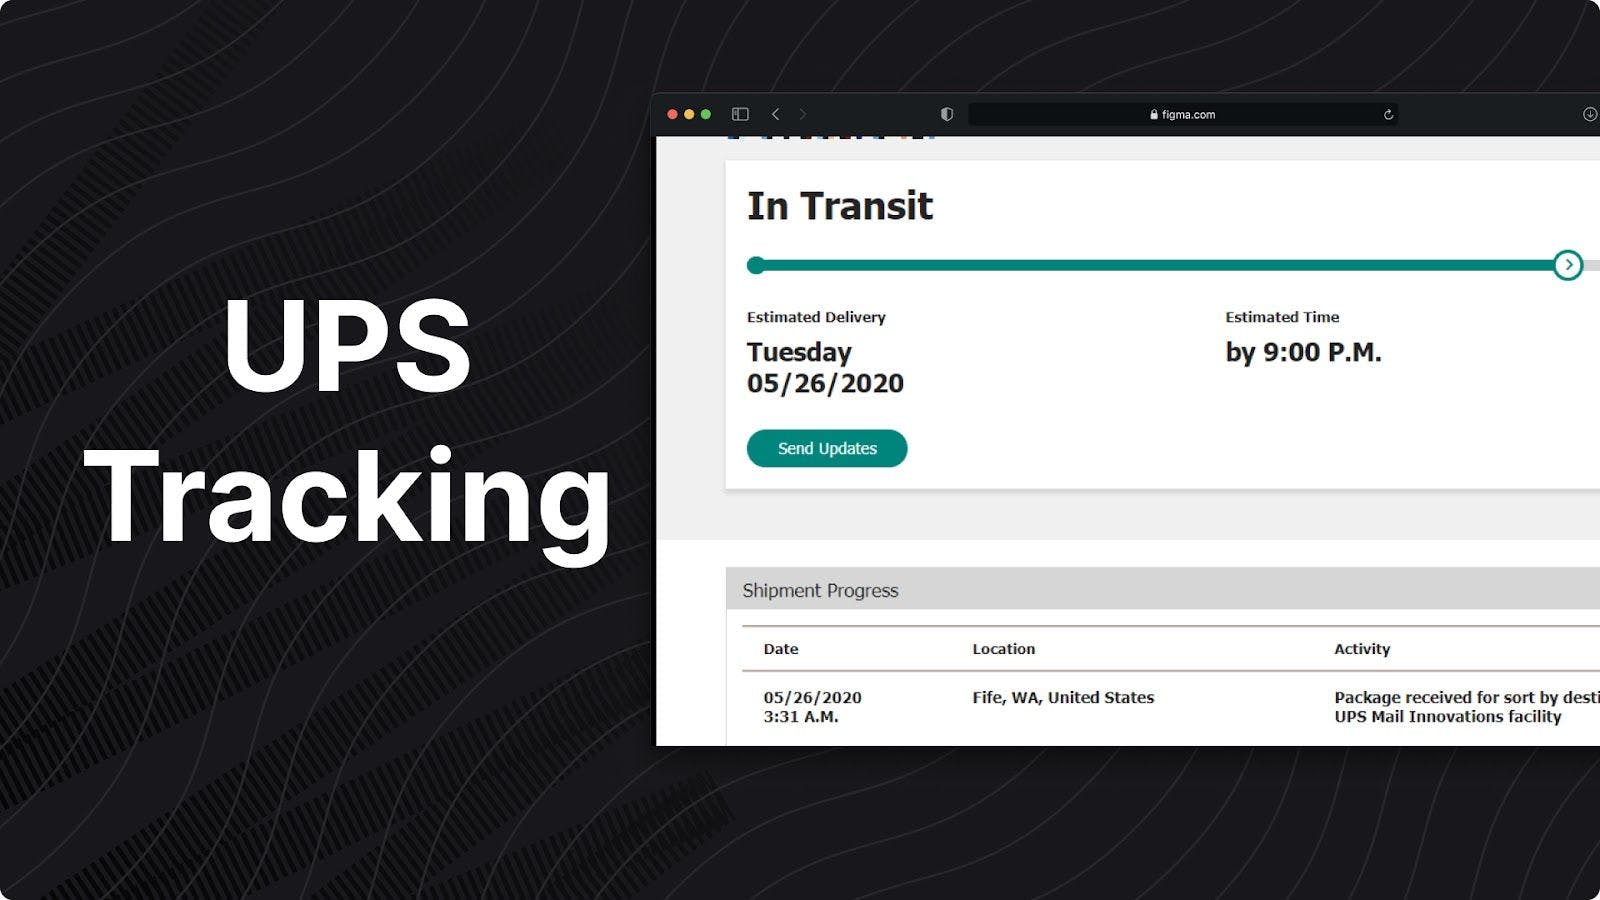 UPS Tracking: Everything You Need to Know